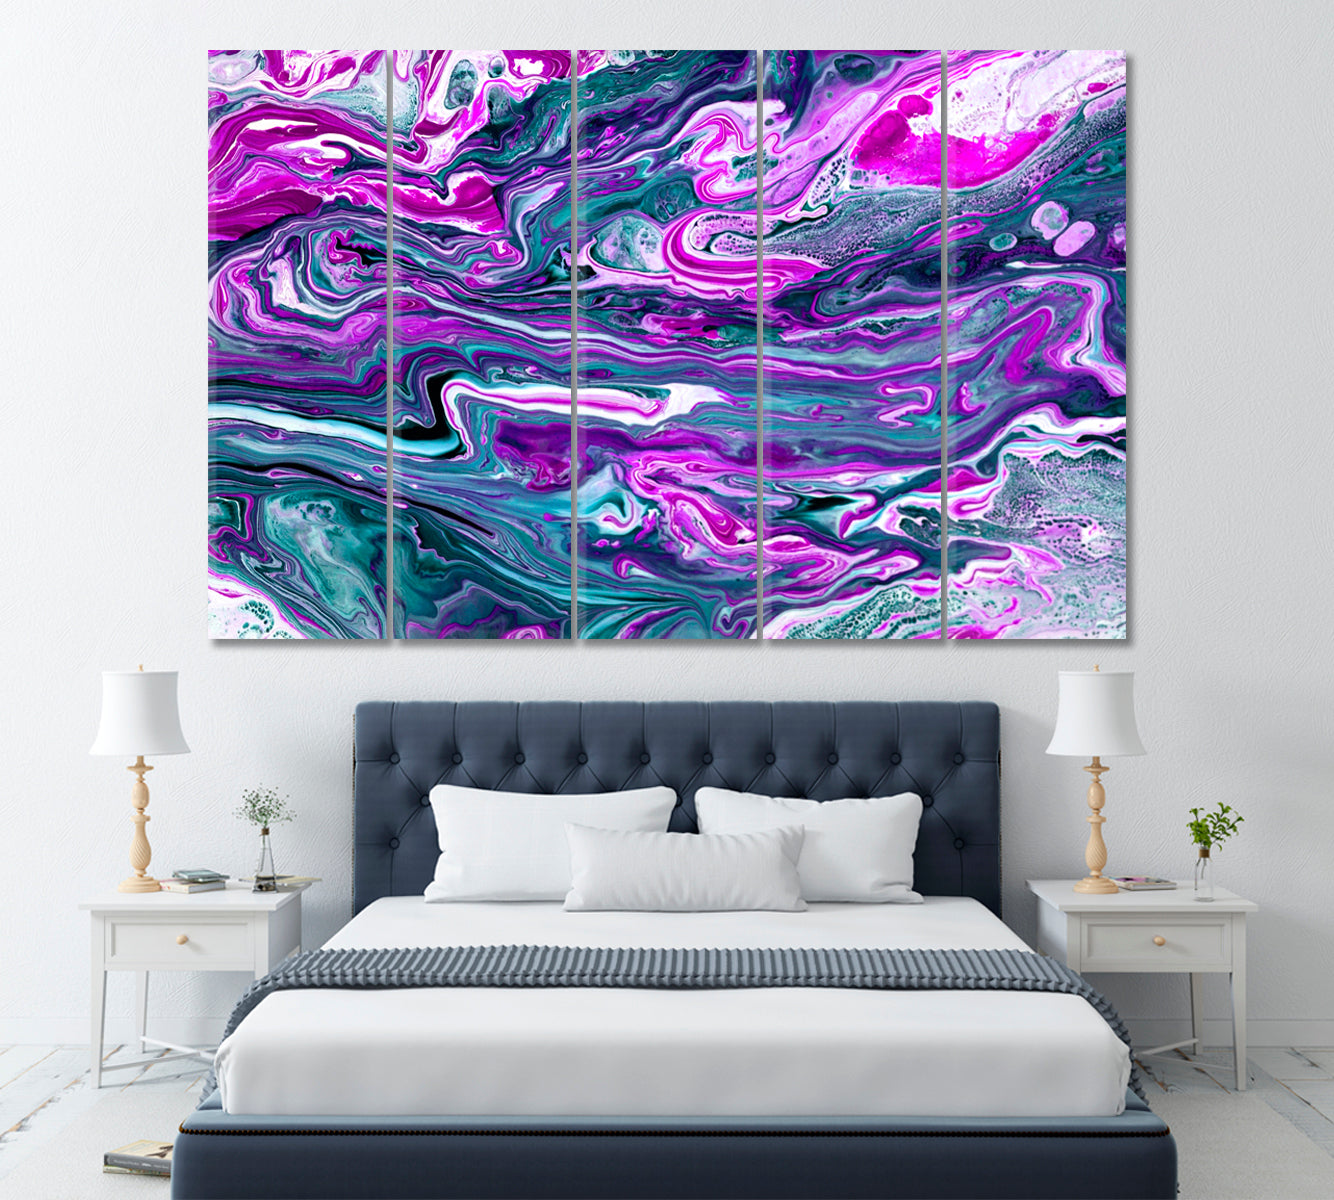 Purple Marbled Waves Canvas Print ArtLexy 5 Panels 36"x24" inches 